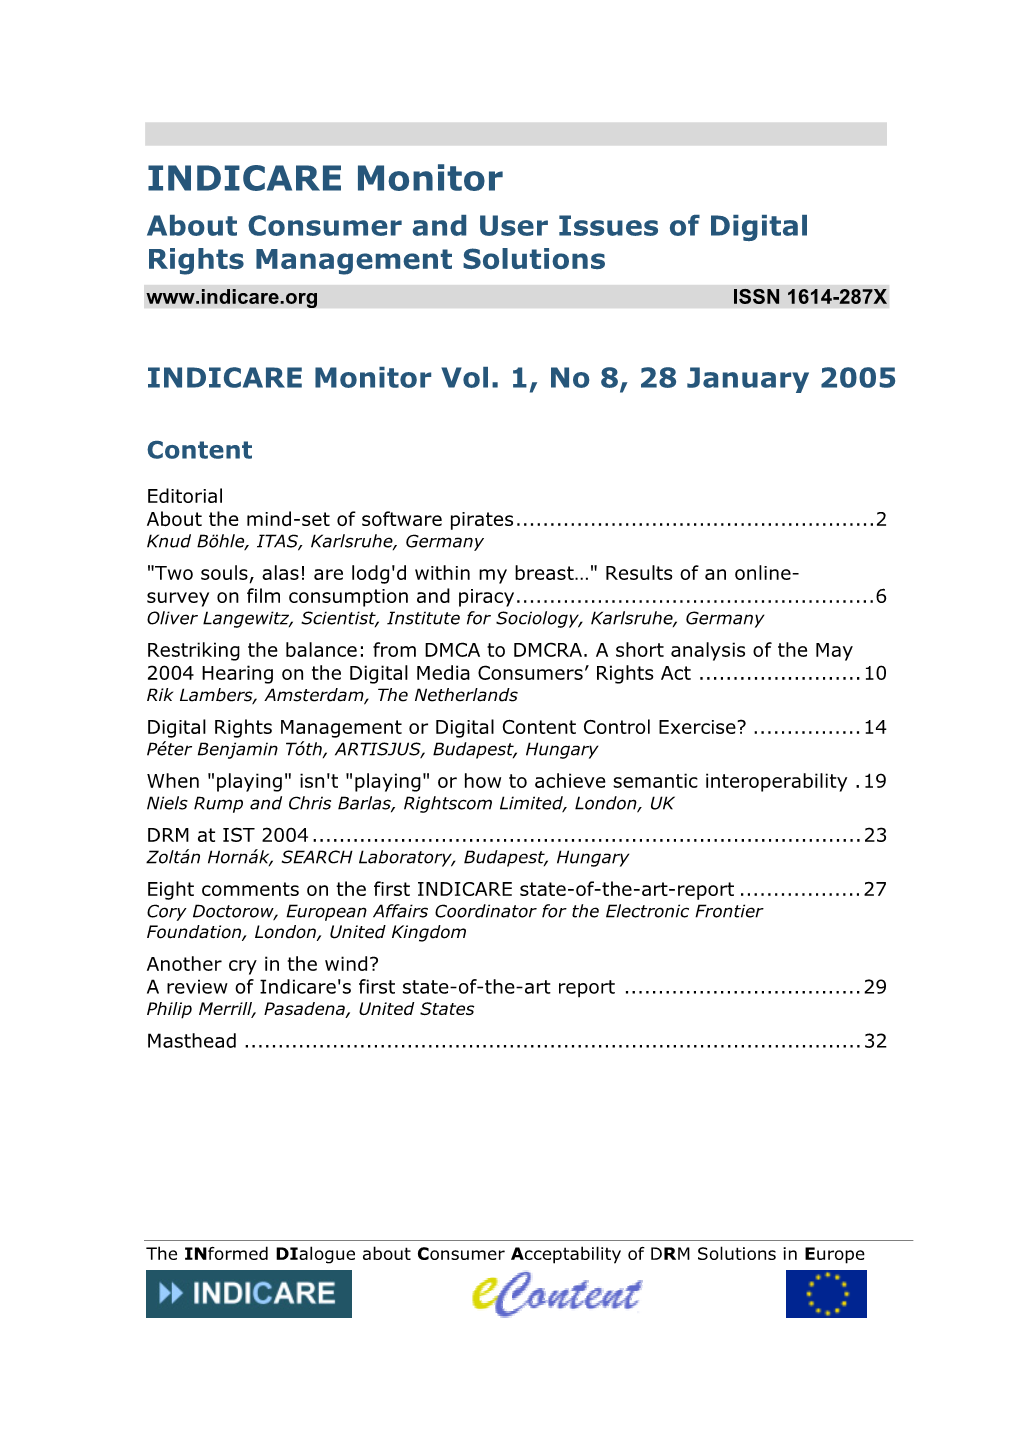 INDICARE Monitor About Consumer and User Issues of Digital Rights Management Solutions ISSN 1614-287X